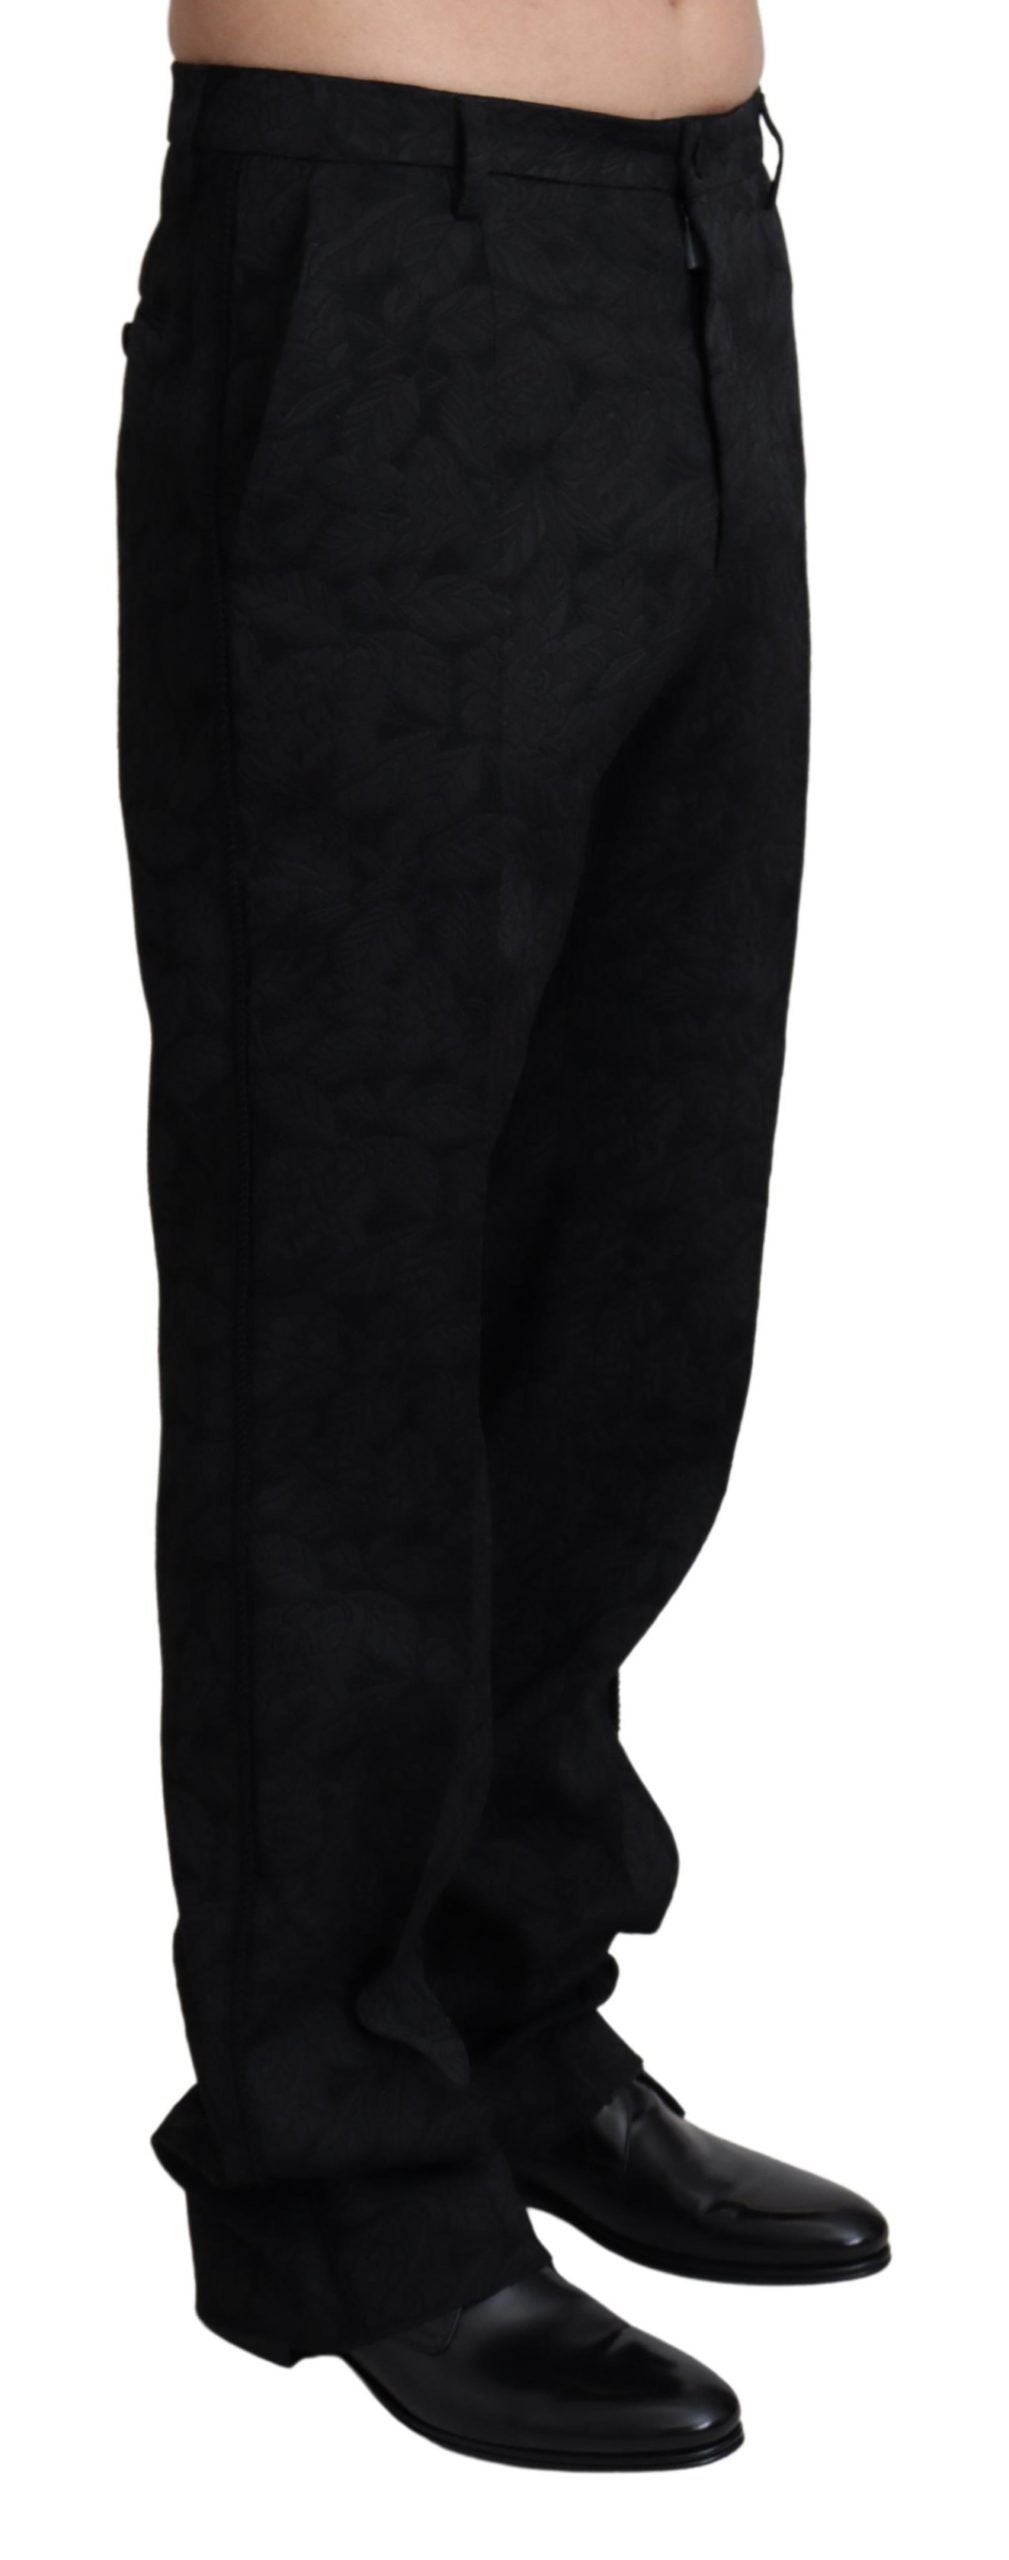 Black Jaquard Formal Men Trouser Pants - Designed by Dolce & Gabbana Available to Buy at a Discounted Price on Moon Behind The Hill Online Designer Discount Store